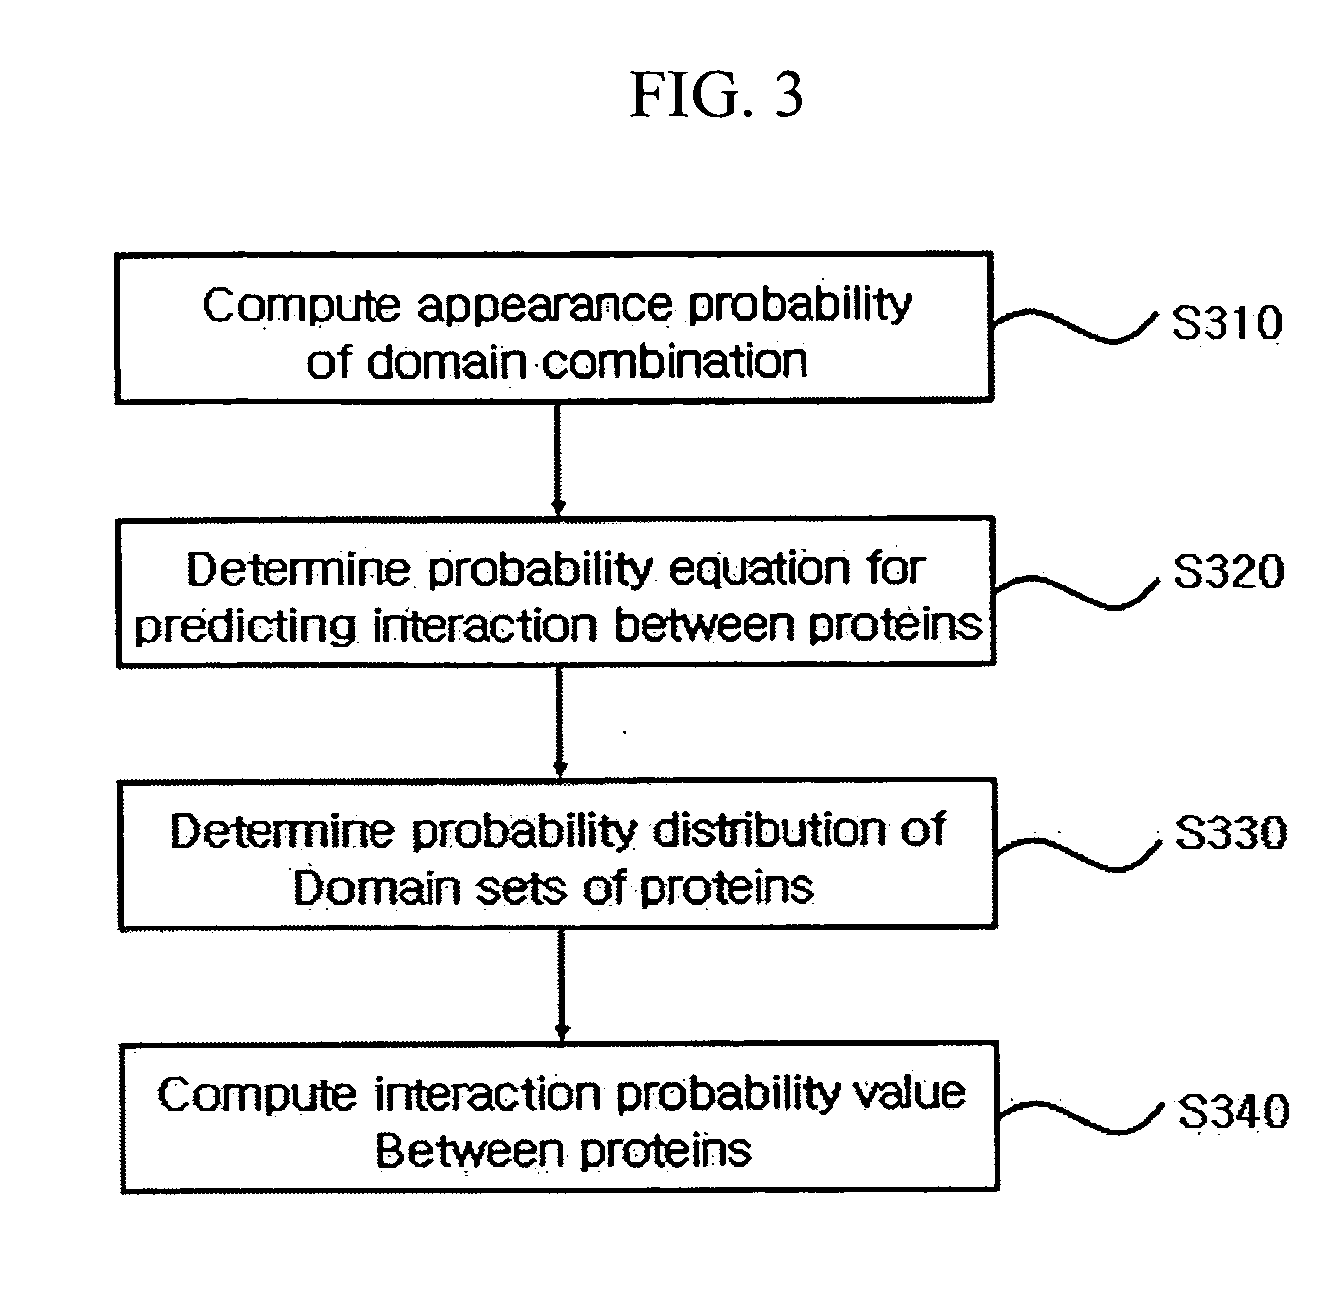 System and method for predicting the interaction between proteins based on domain combination